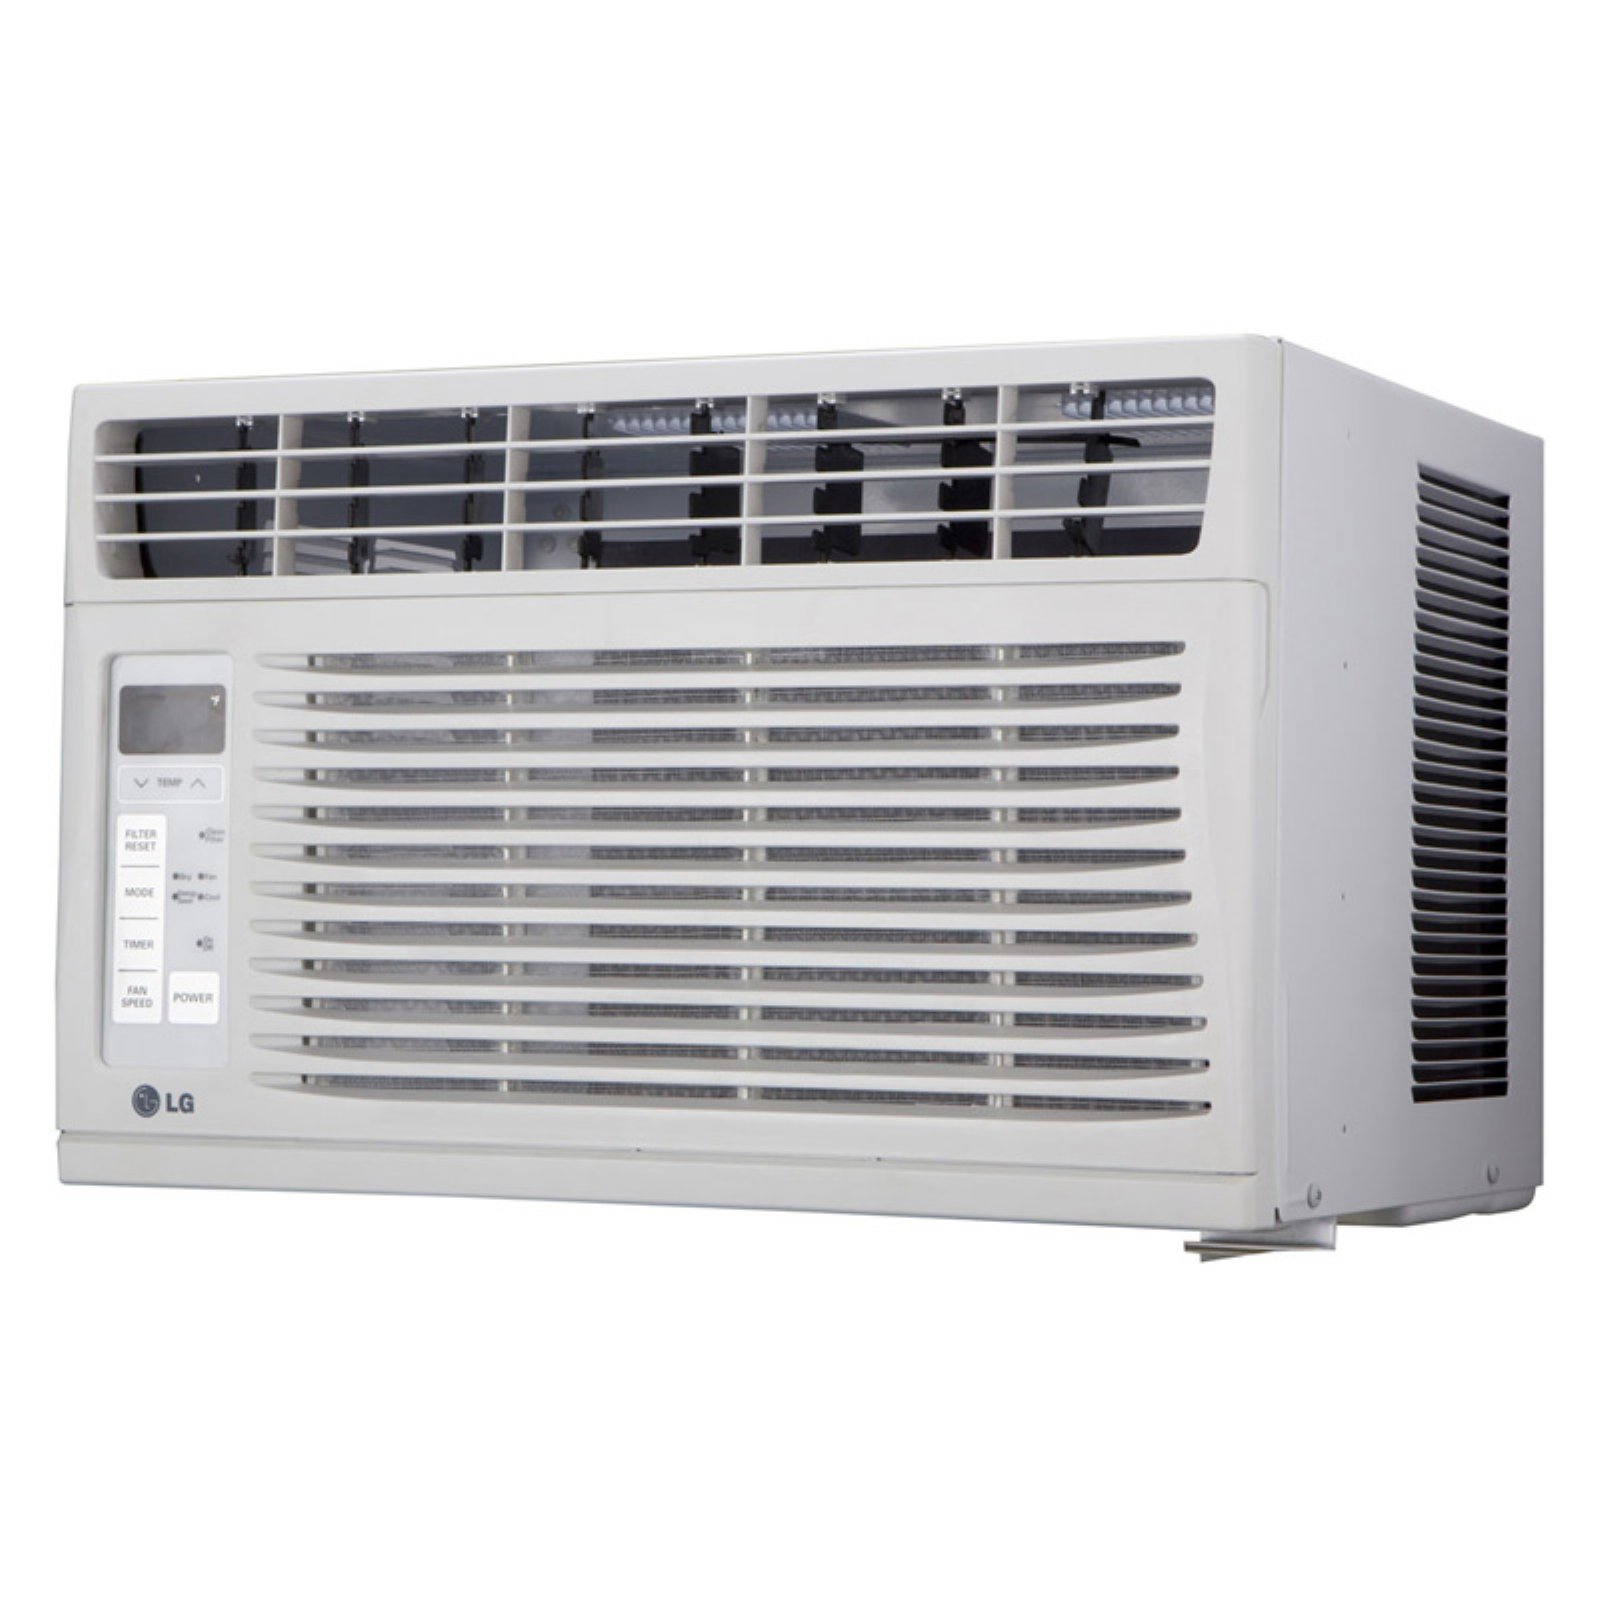 LG LW2516 Energy Star Electronic Air Conditioner - image 1 of 3